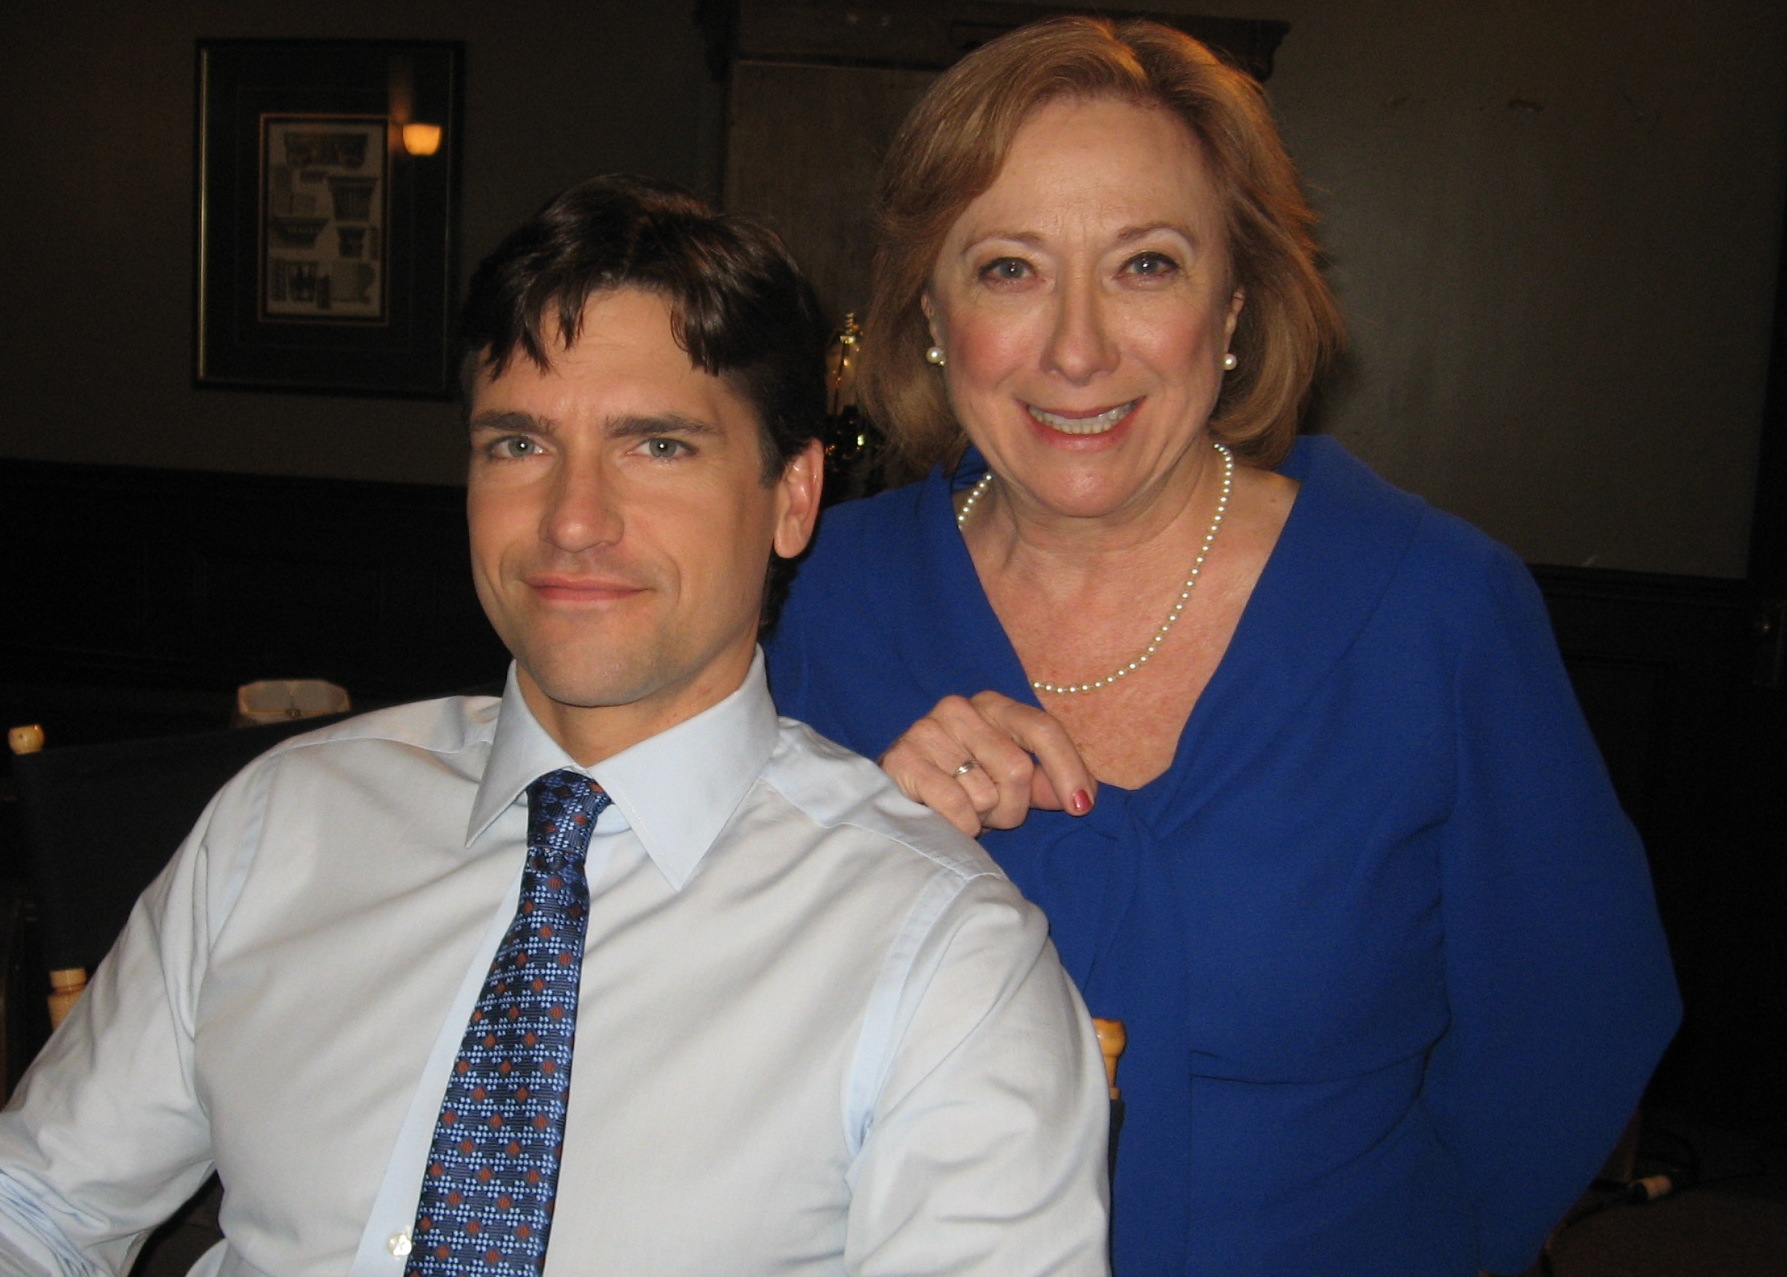 With Jackson Hurst on the set of DROP DEAD DIVA.